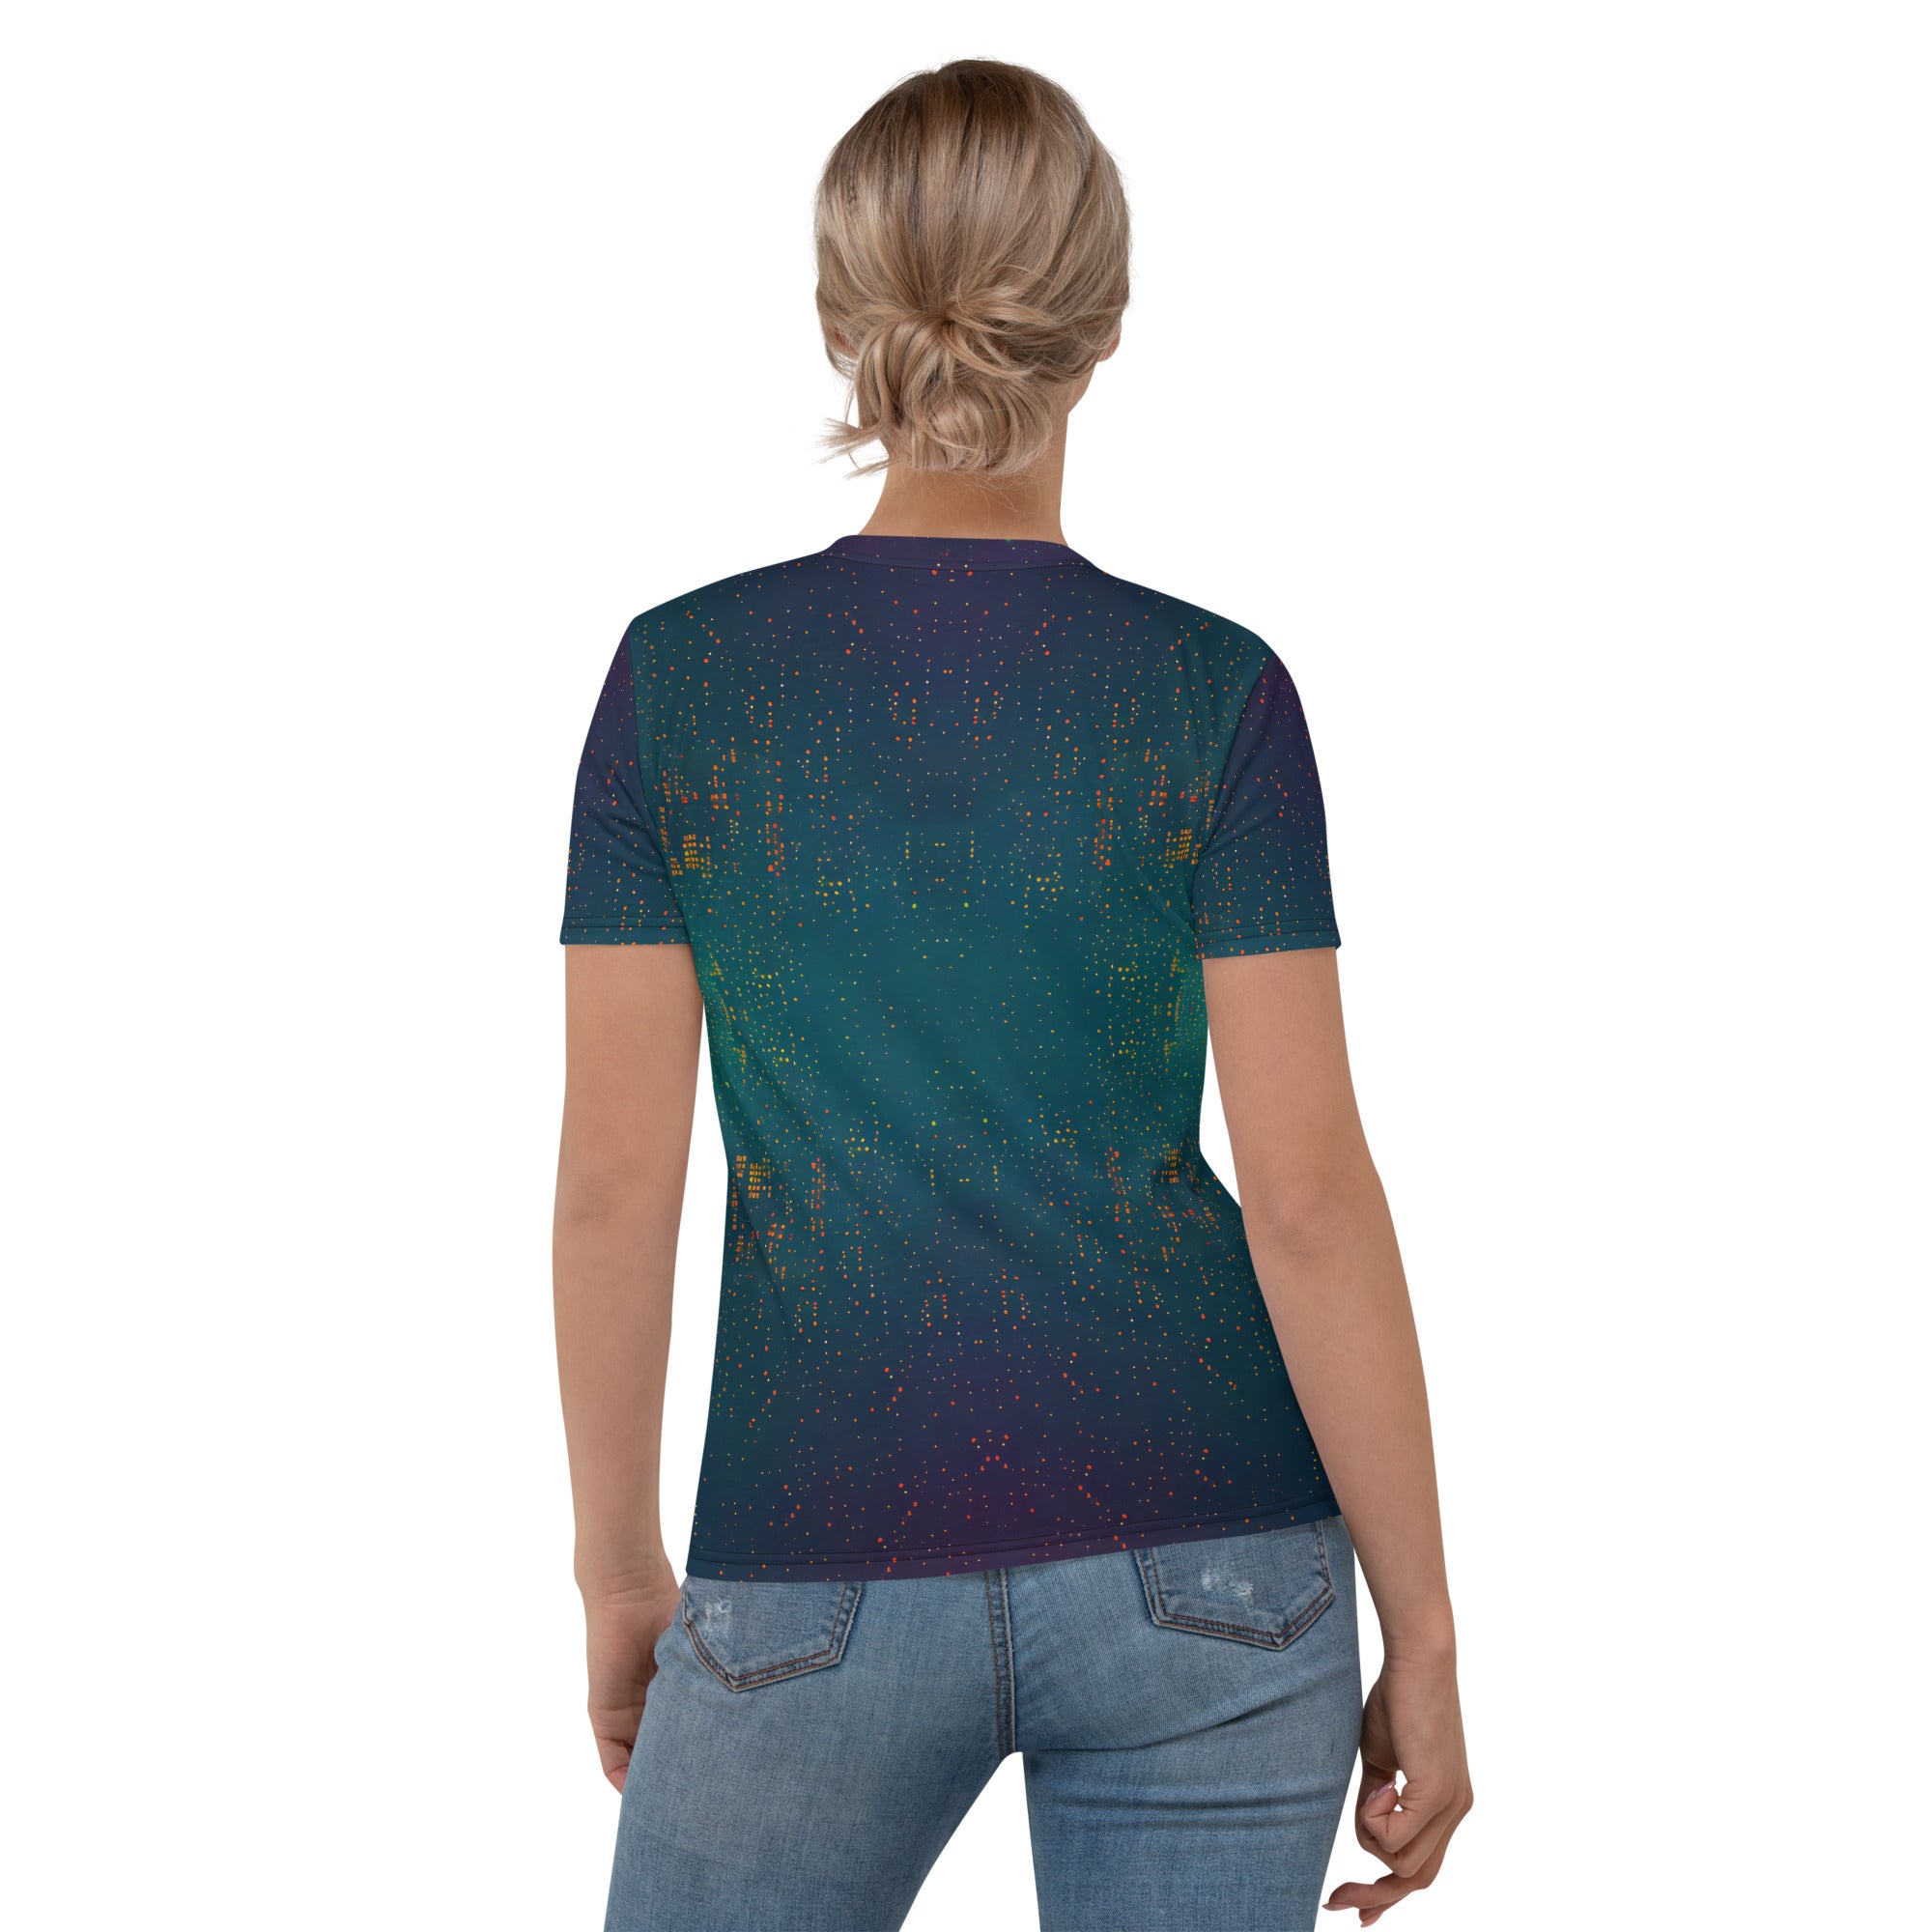 Ethereal Echoes Women's Crew Neck Tee - Back View